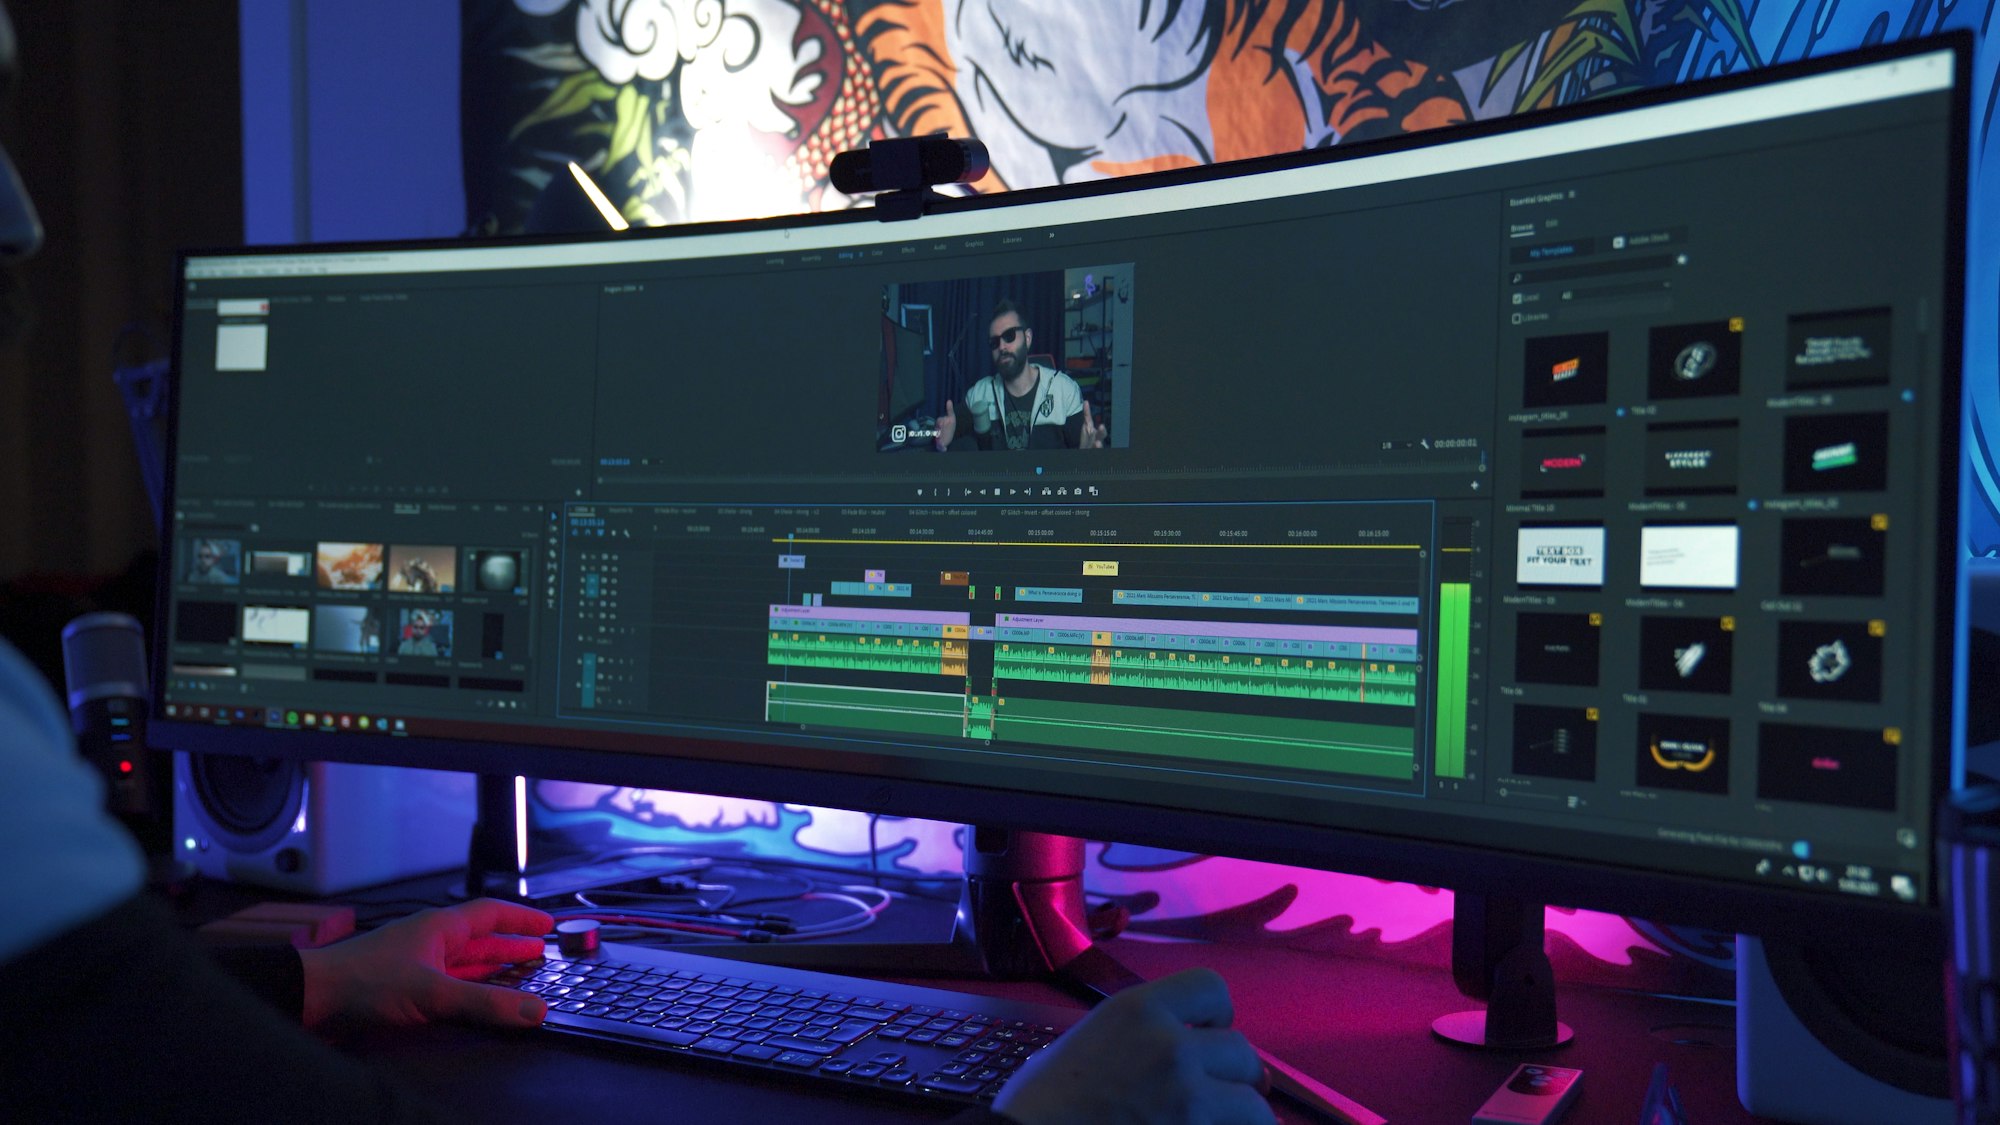 Video Editor Works with Adobe Premiere Pro